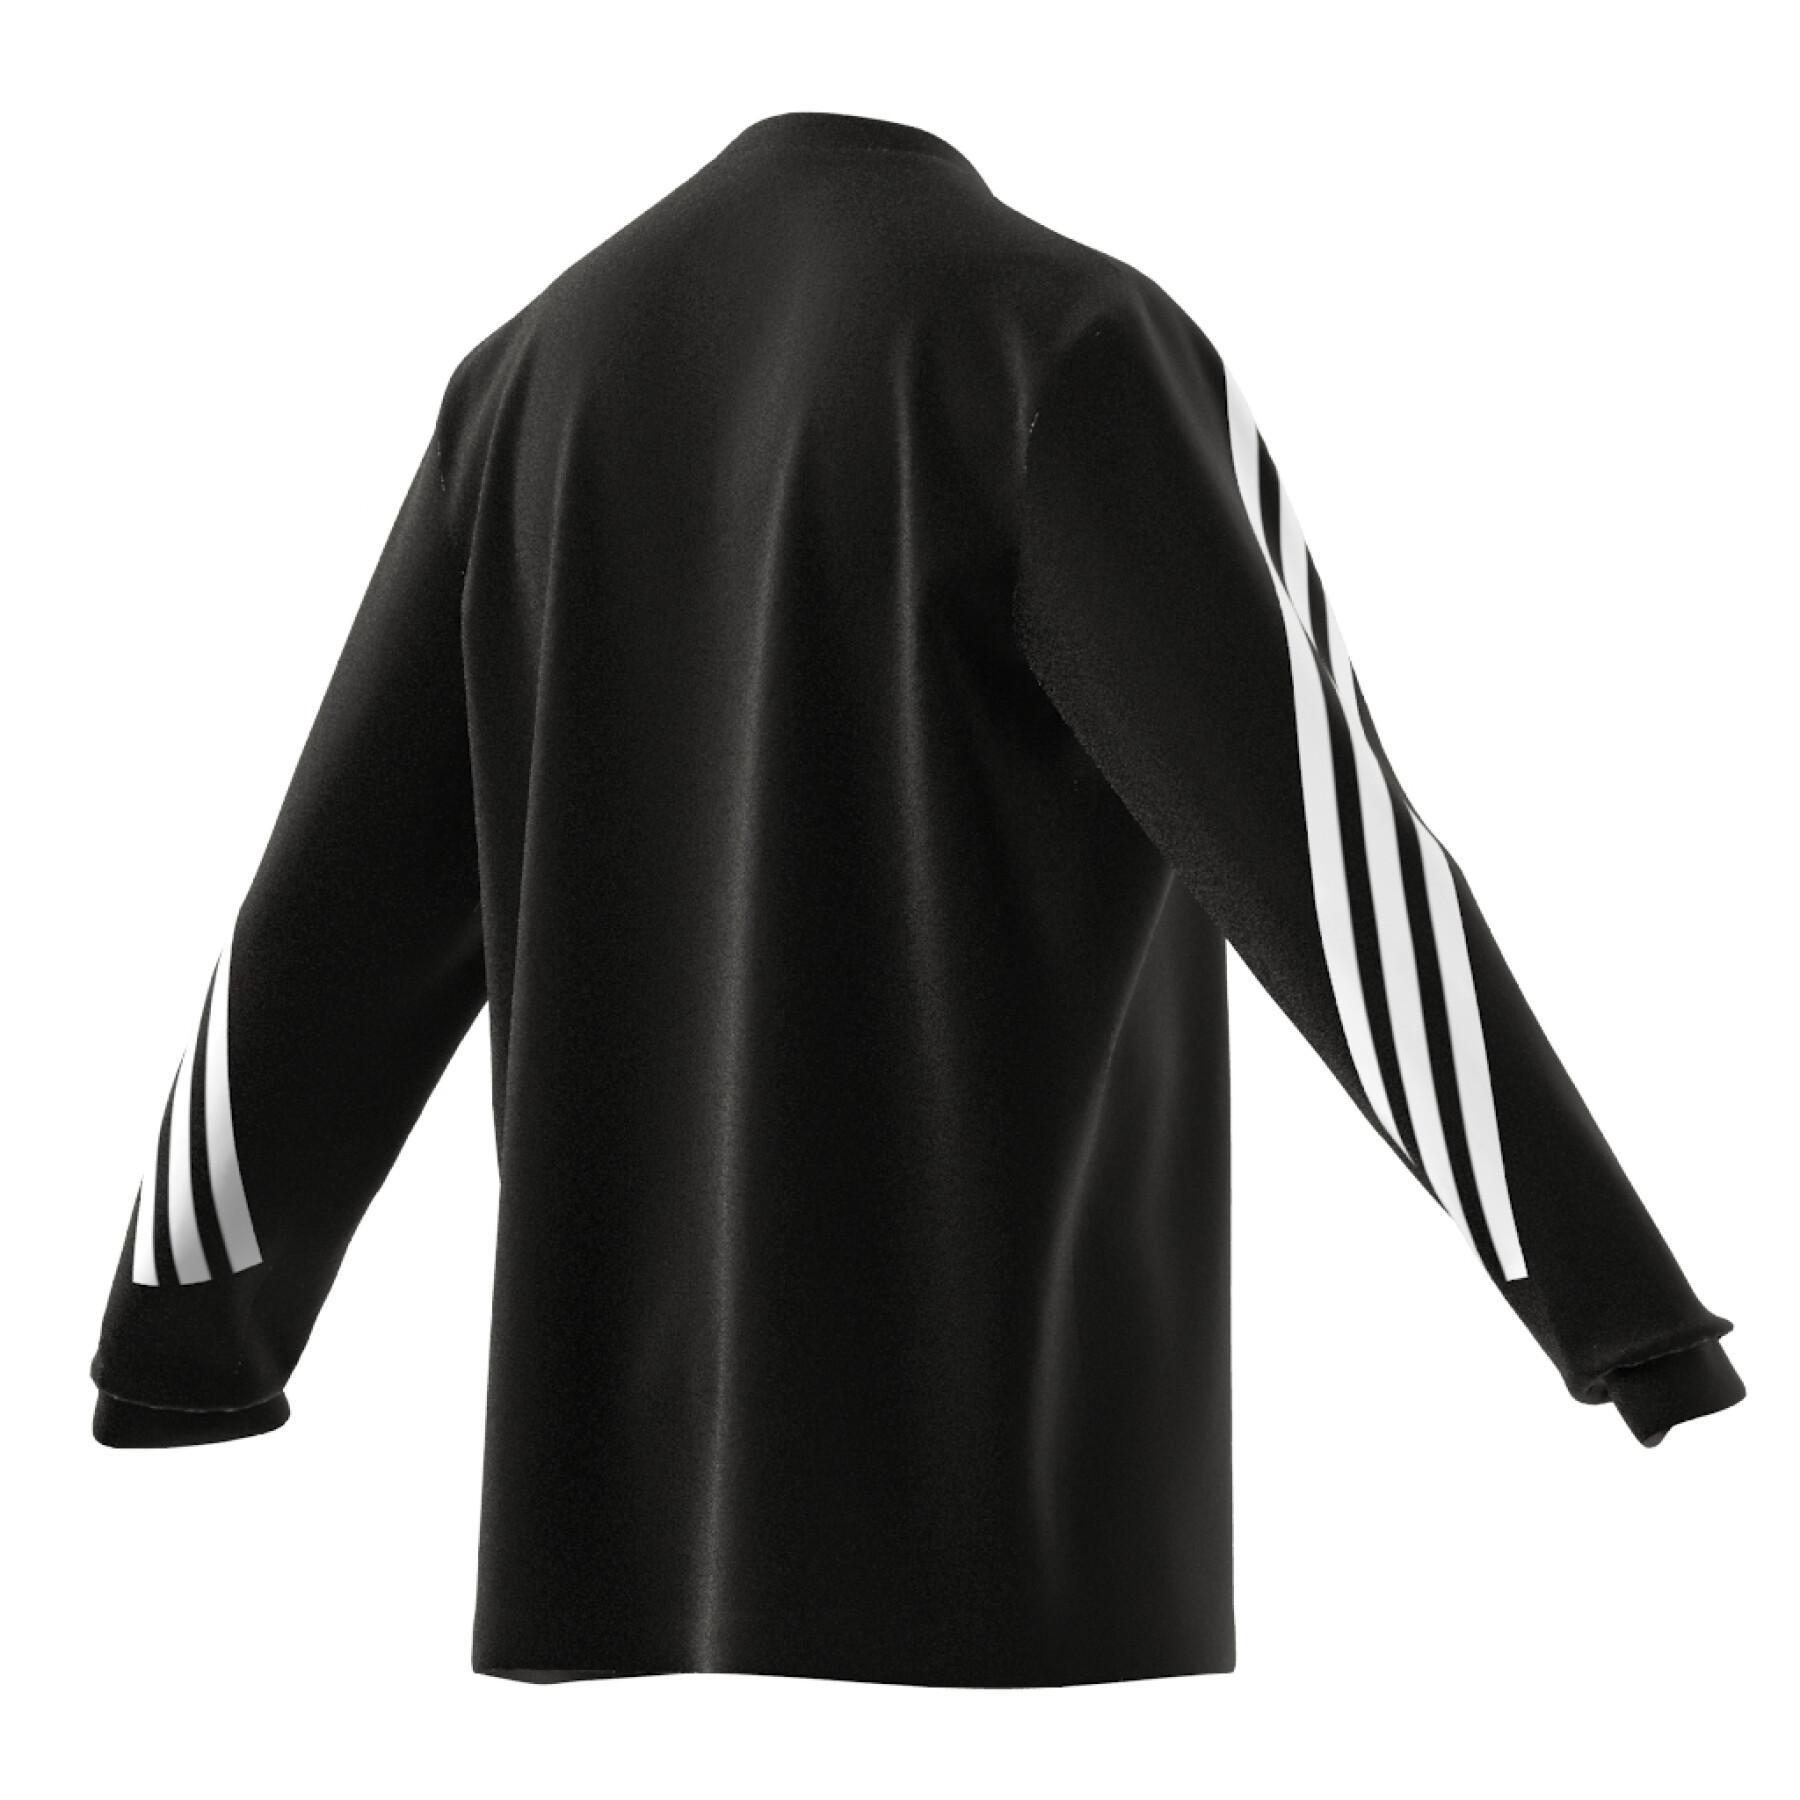 Long sleeve jersey adidas Future Icons 3-Stripes